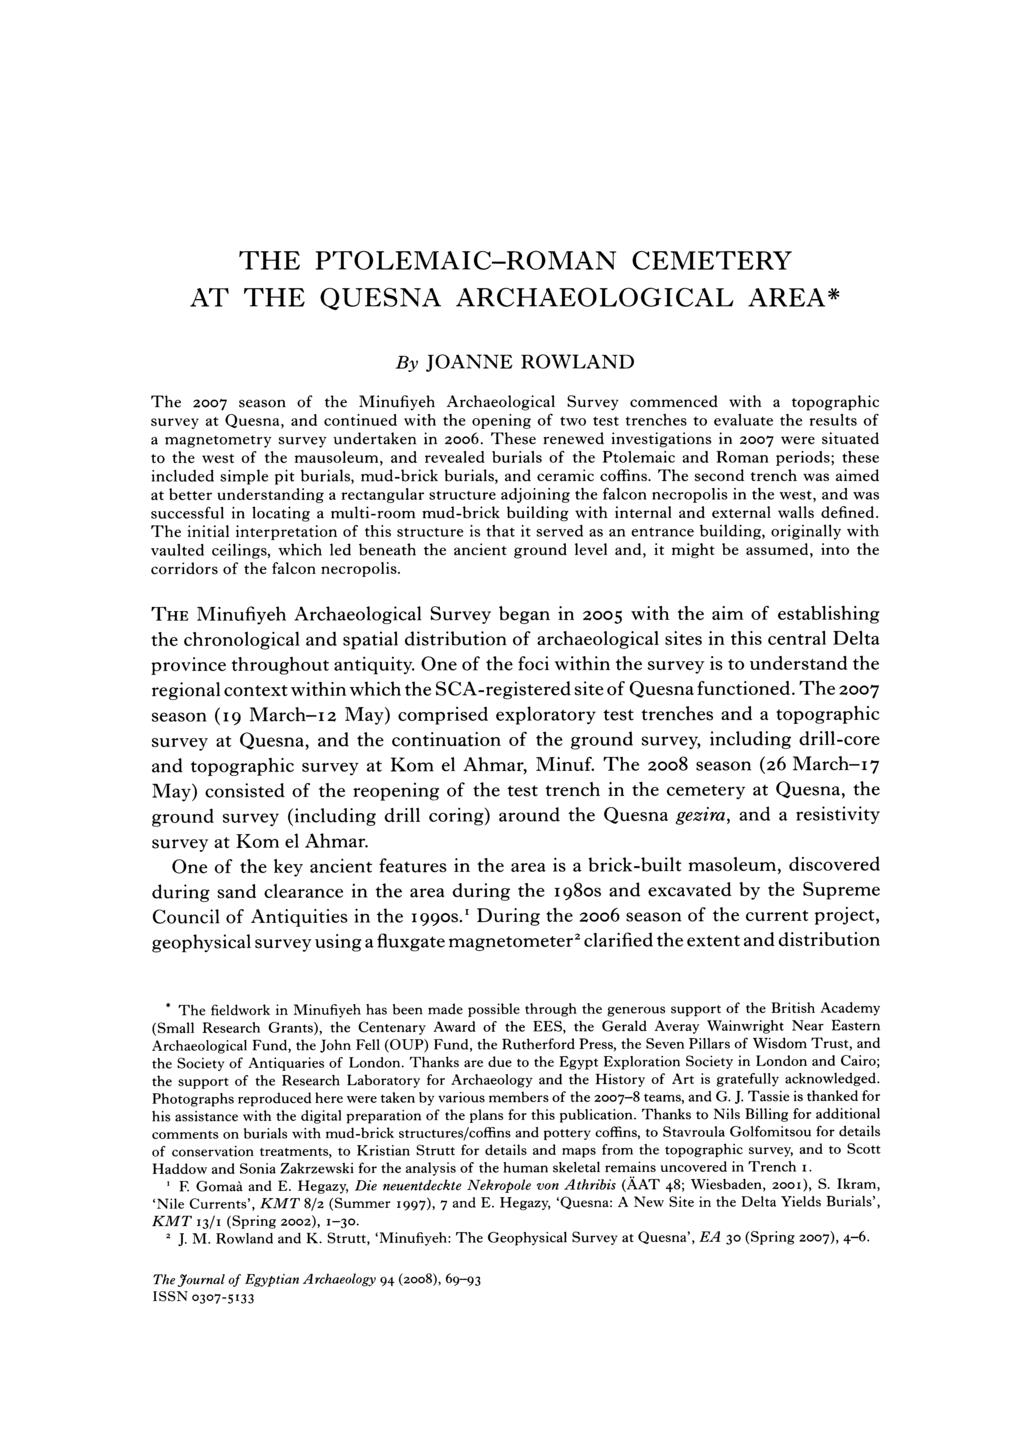 THE PTOLEMAIC-ROMAN CEMETERY AT THE QUESNA ARCHAEOLOGICAL AREA* By JOANNE ROWLAND The 2007 season of the Minufiyeh Archaeological Survey commenced with a topographic survey at Quesna, and continued